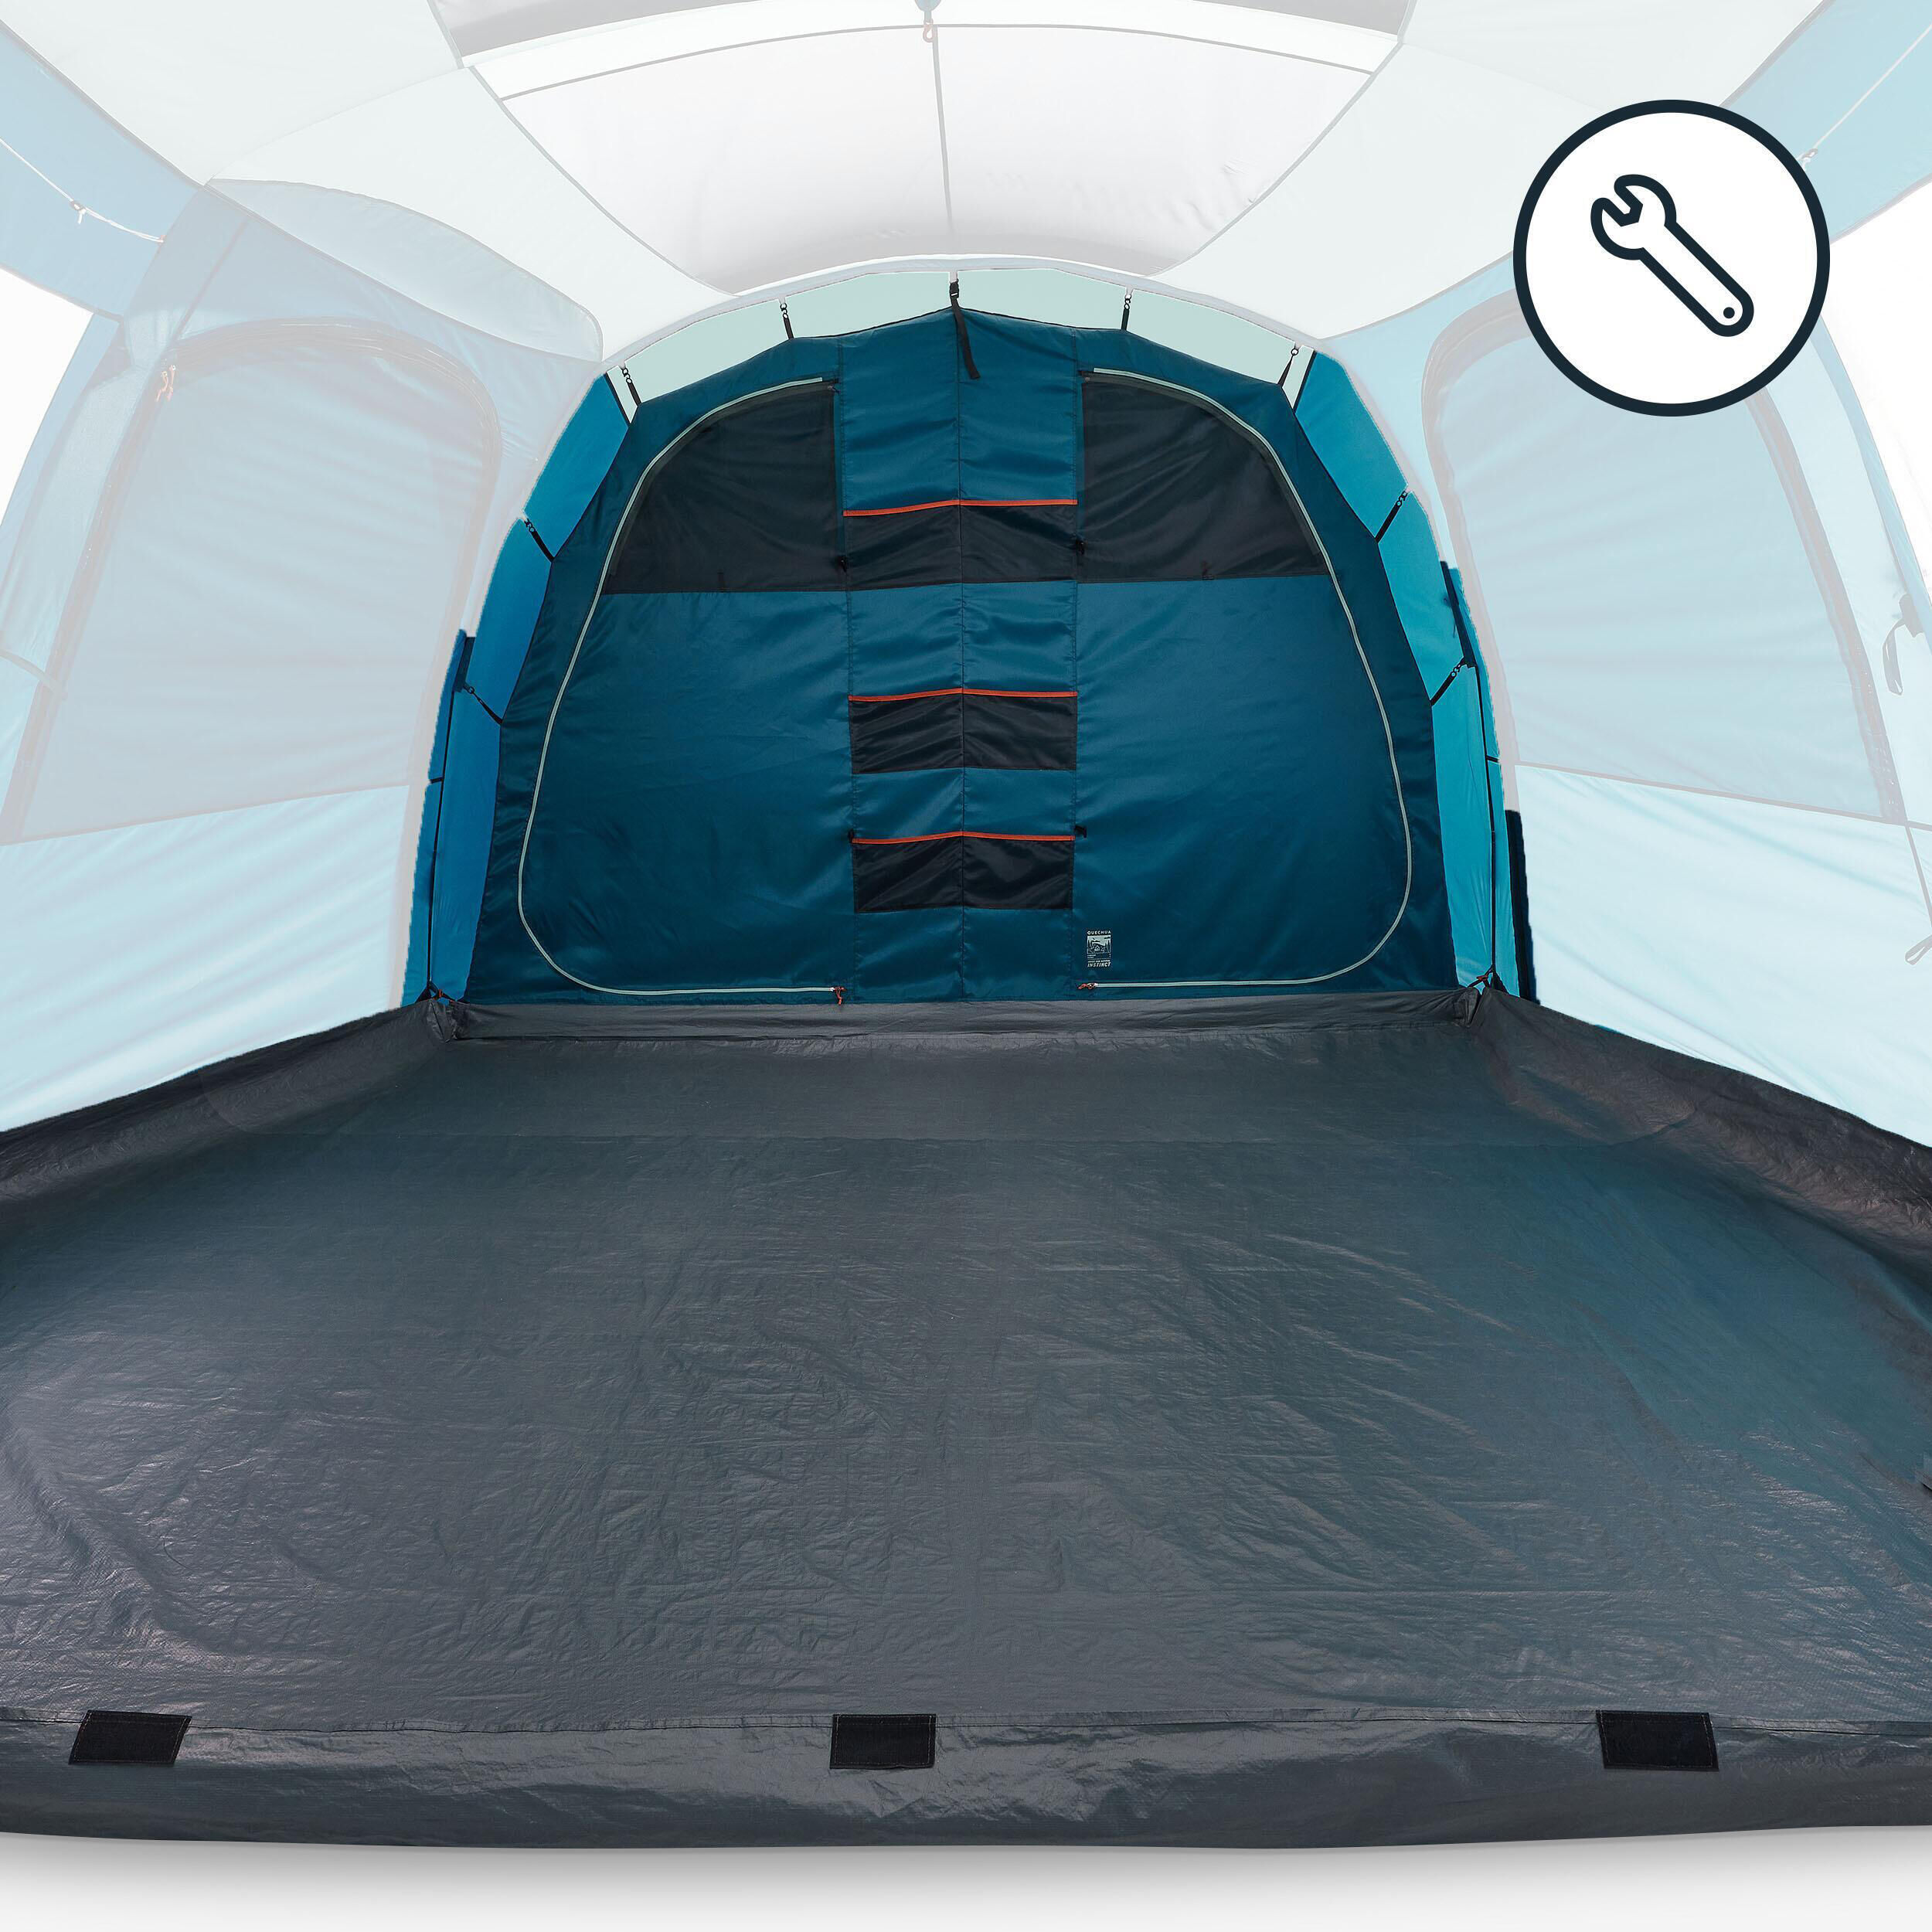 QUECHUA BEDROOM AND GROUNDSHEET - SPARE PART FOR THE ARPENAZ 8.4 TENT